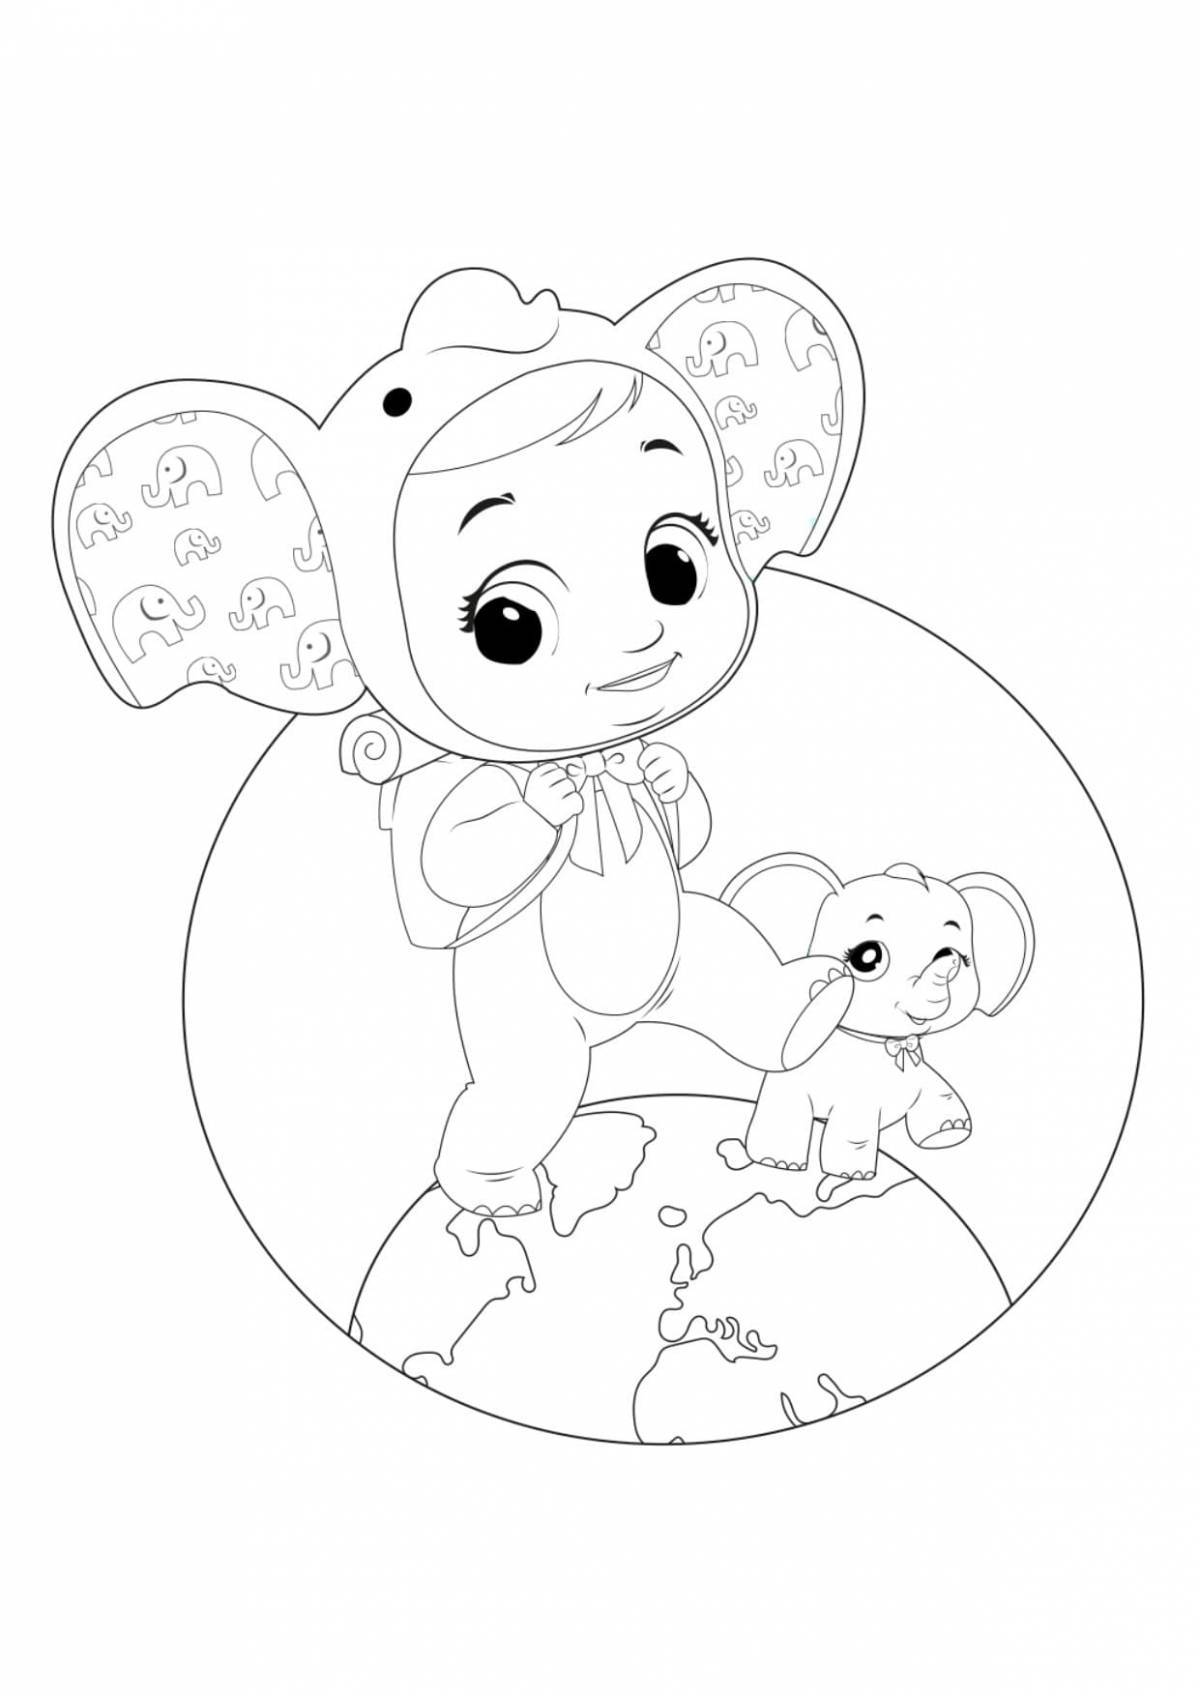 Color-explosion edge baby coloring page